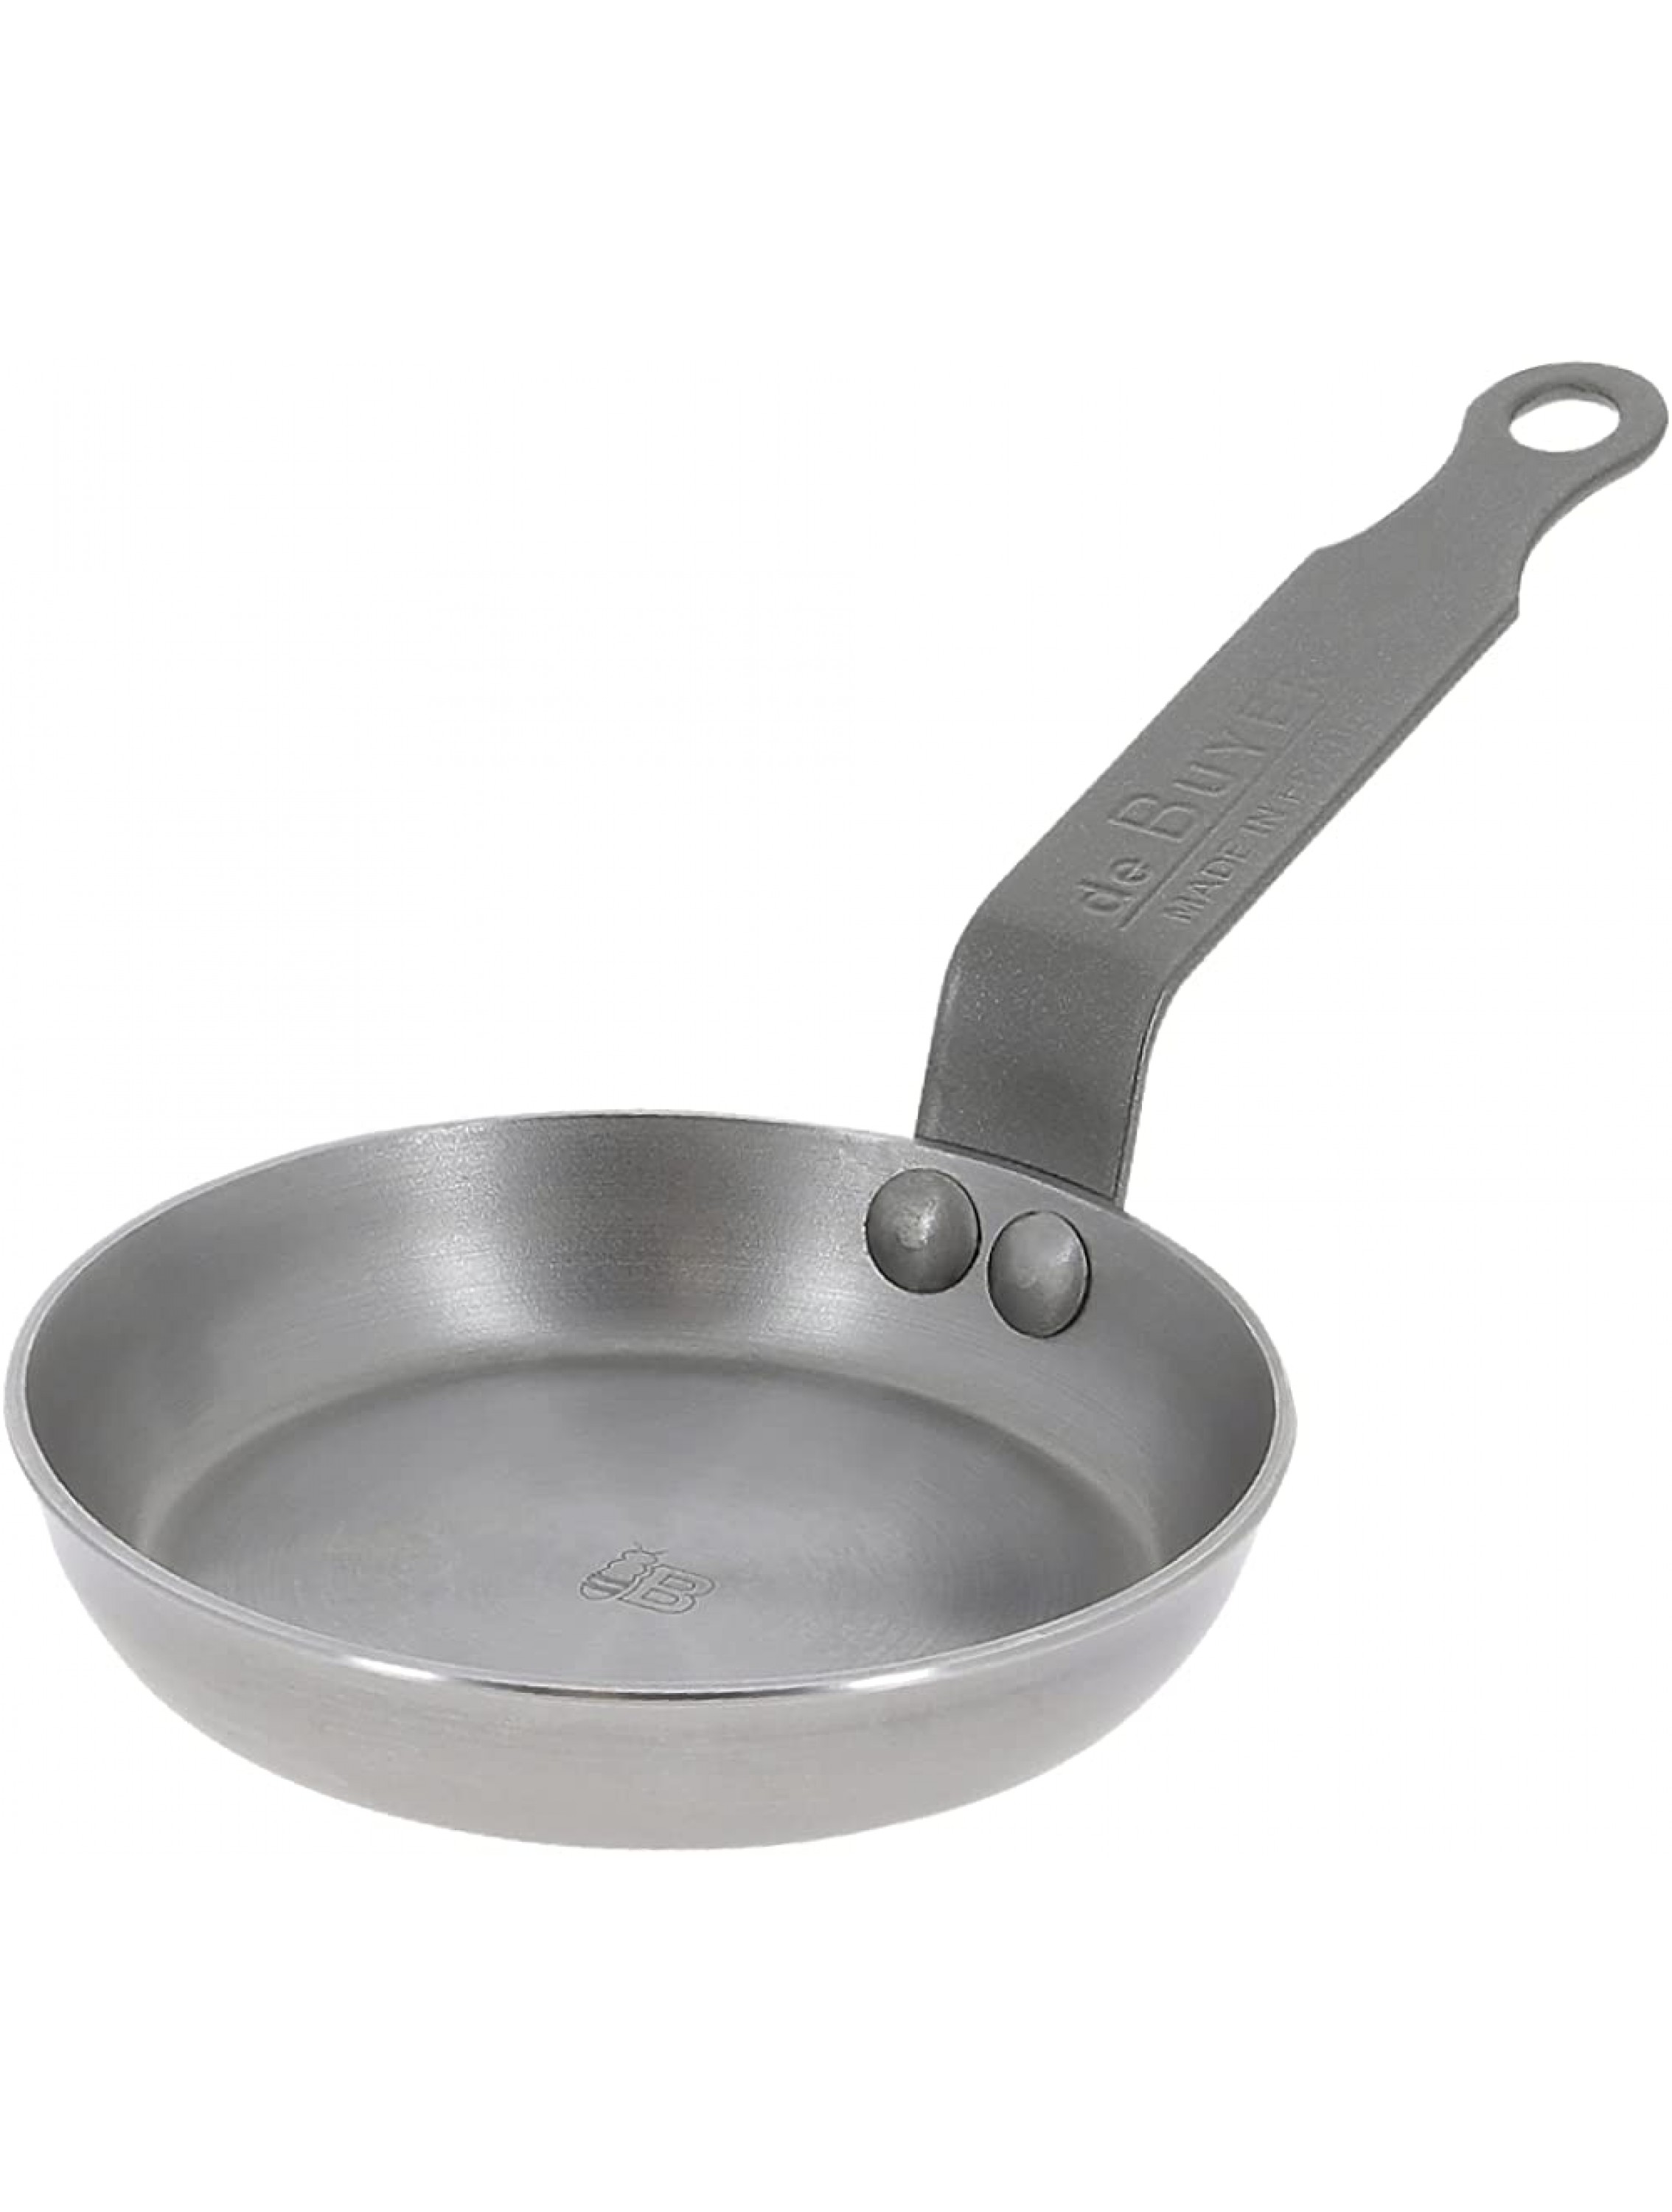 de Buyer Mineral B Egg Pan Nonstick Frying Pan Carbon and Stainless Steel Induction-ready 4.75 - B4PO95S90